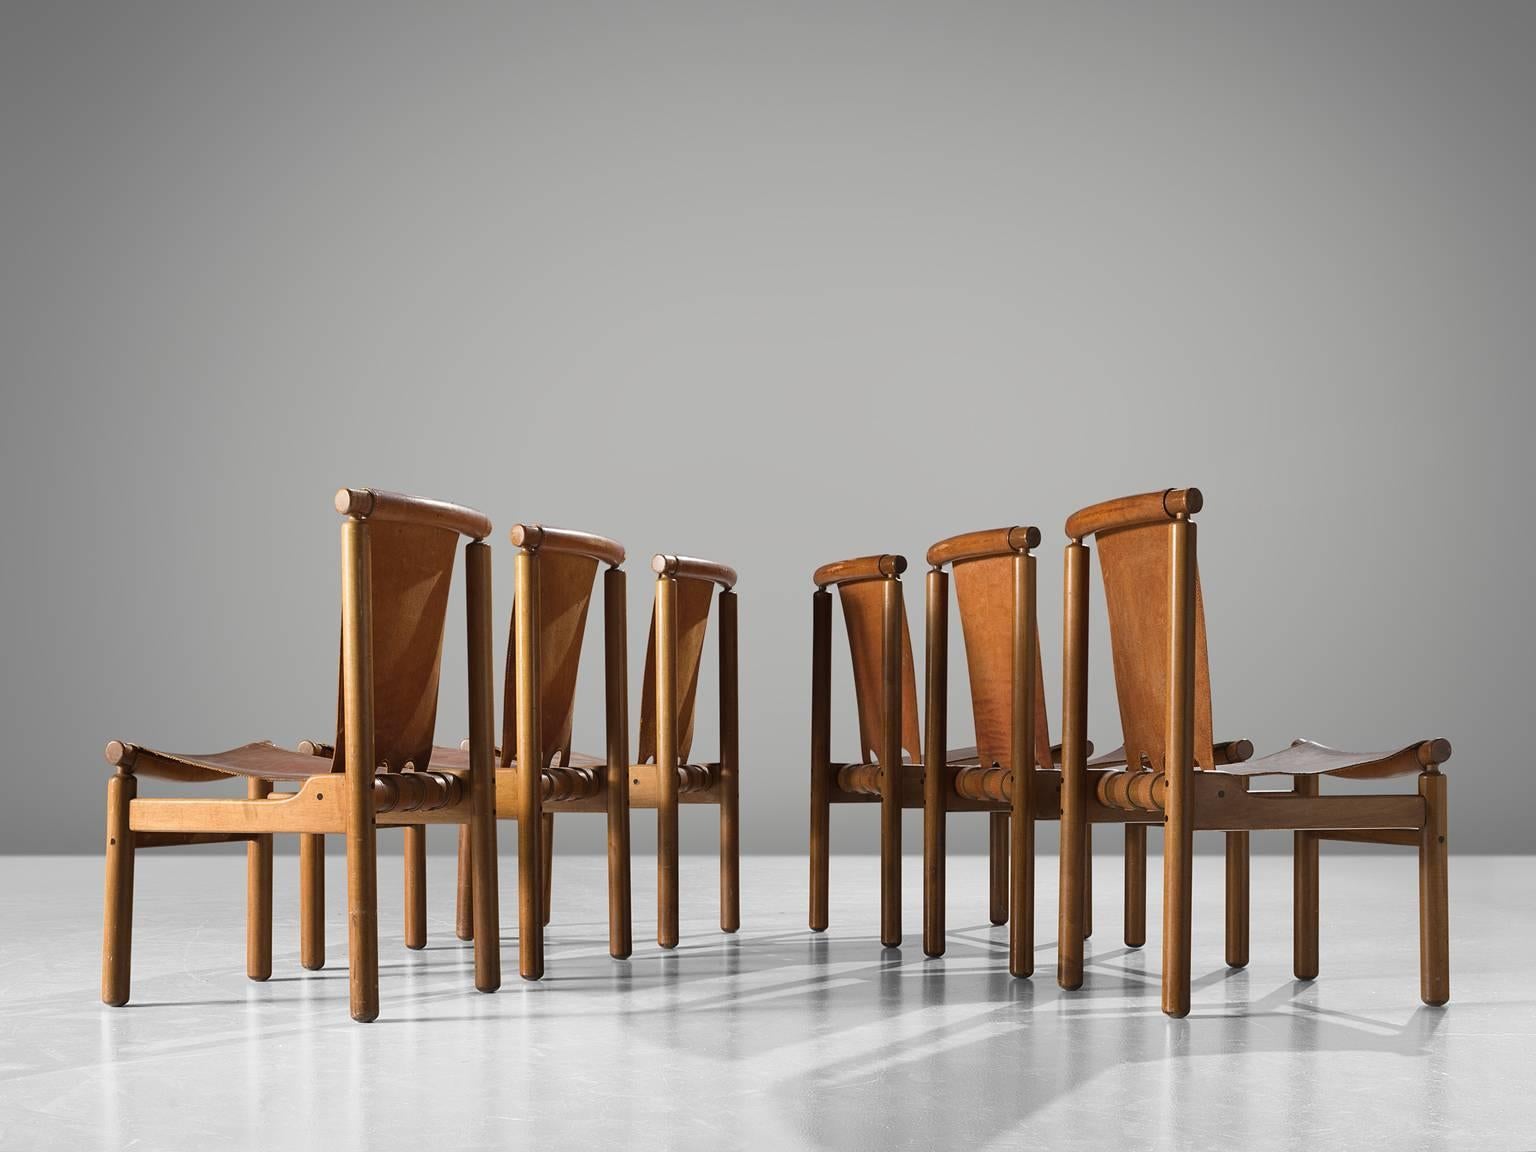 Dining chairs attributed to Ilmari Tapiovaara, wood and leather, Finland, 1950s.

These robust chairs feature a geometric, sturdy frame. Yet they feature a certain spaciousness thanks to the decorative opening on the bottom of the backrest. The